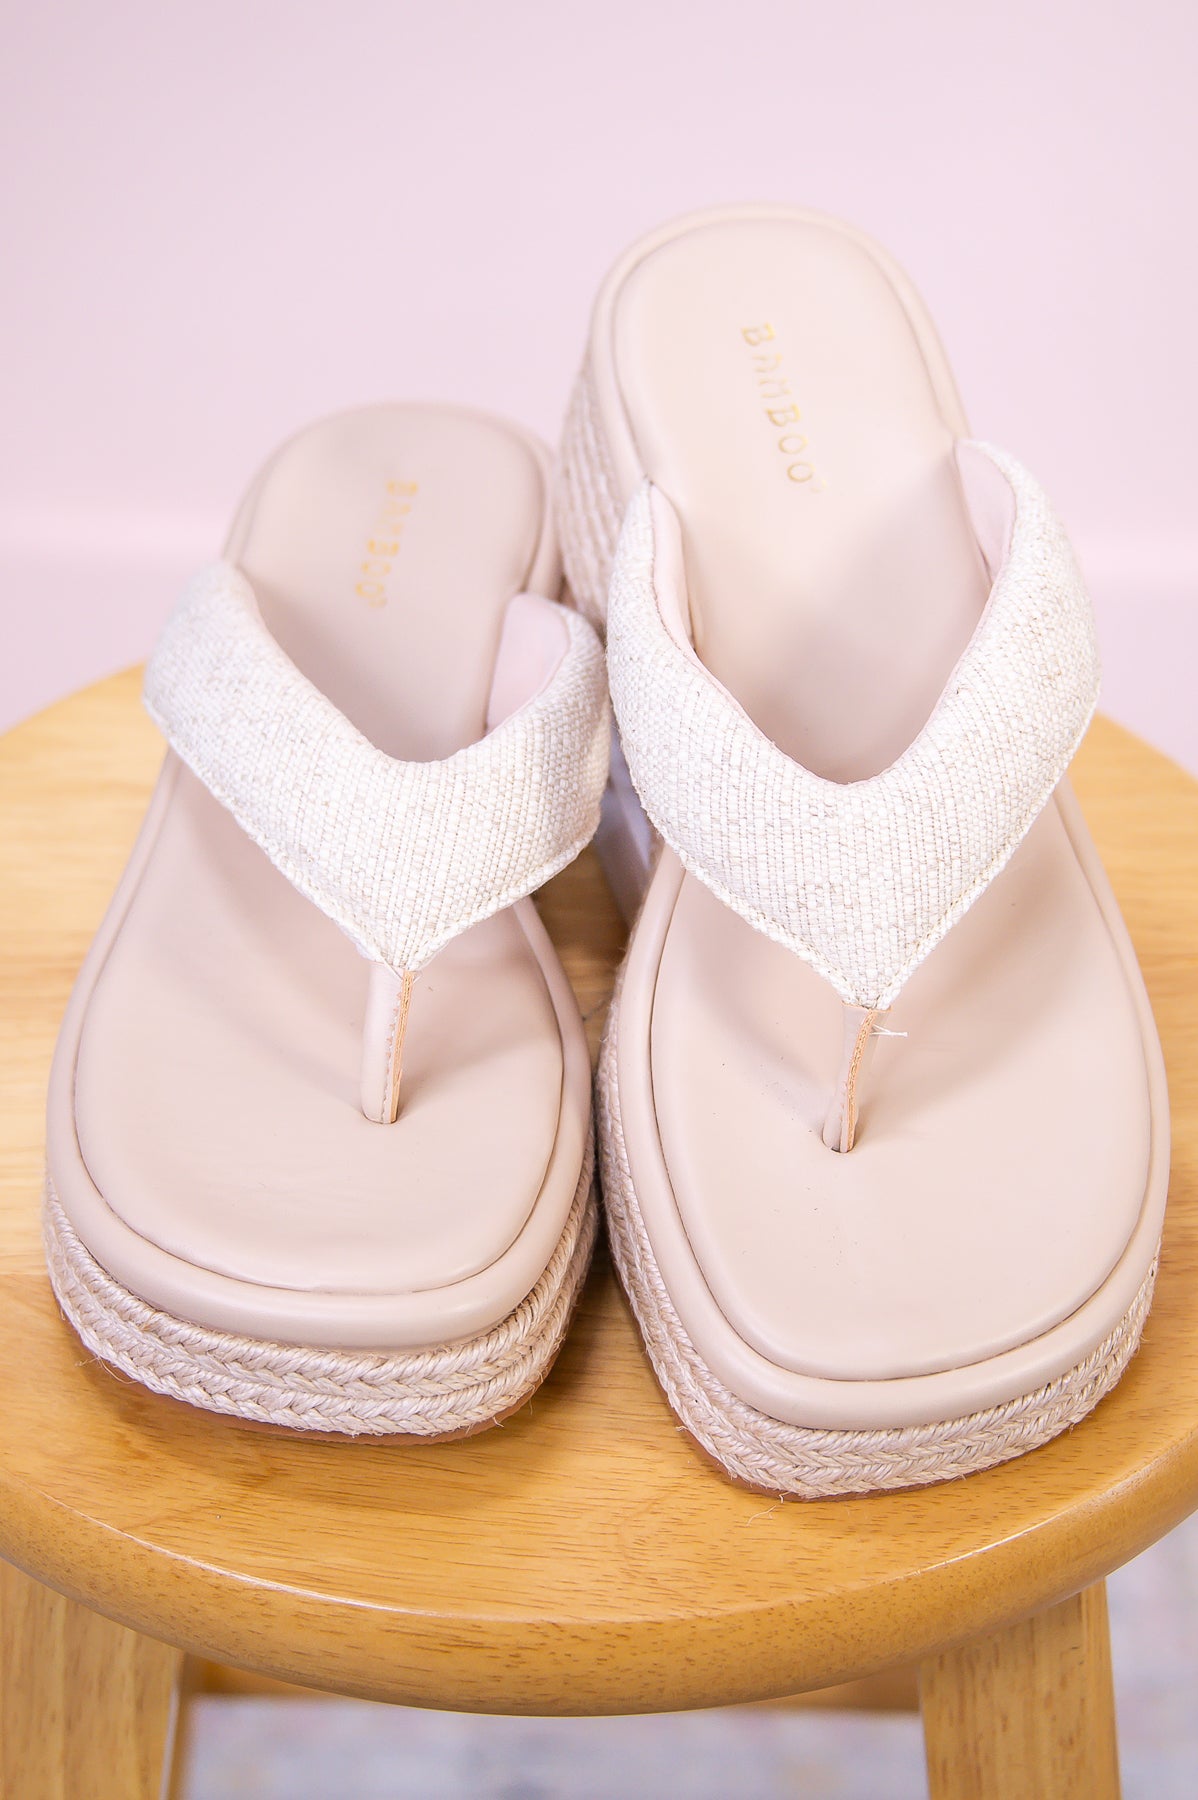 Stay Connected Beige Espadrille Wedge Sandals - SHO2707BG